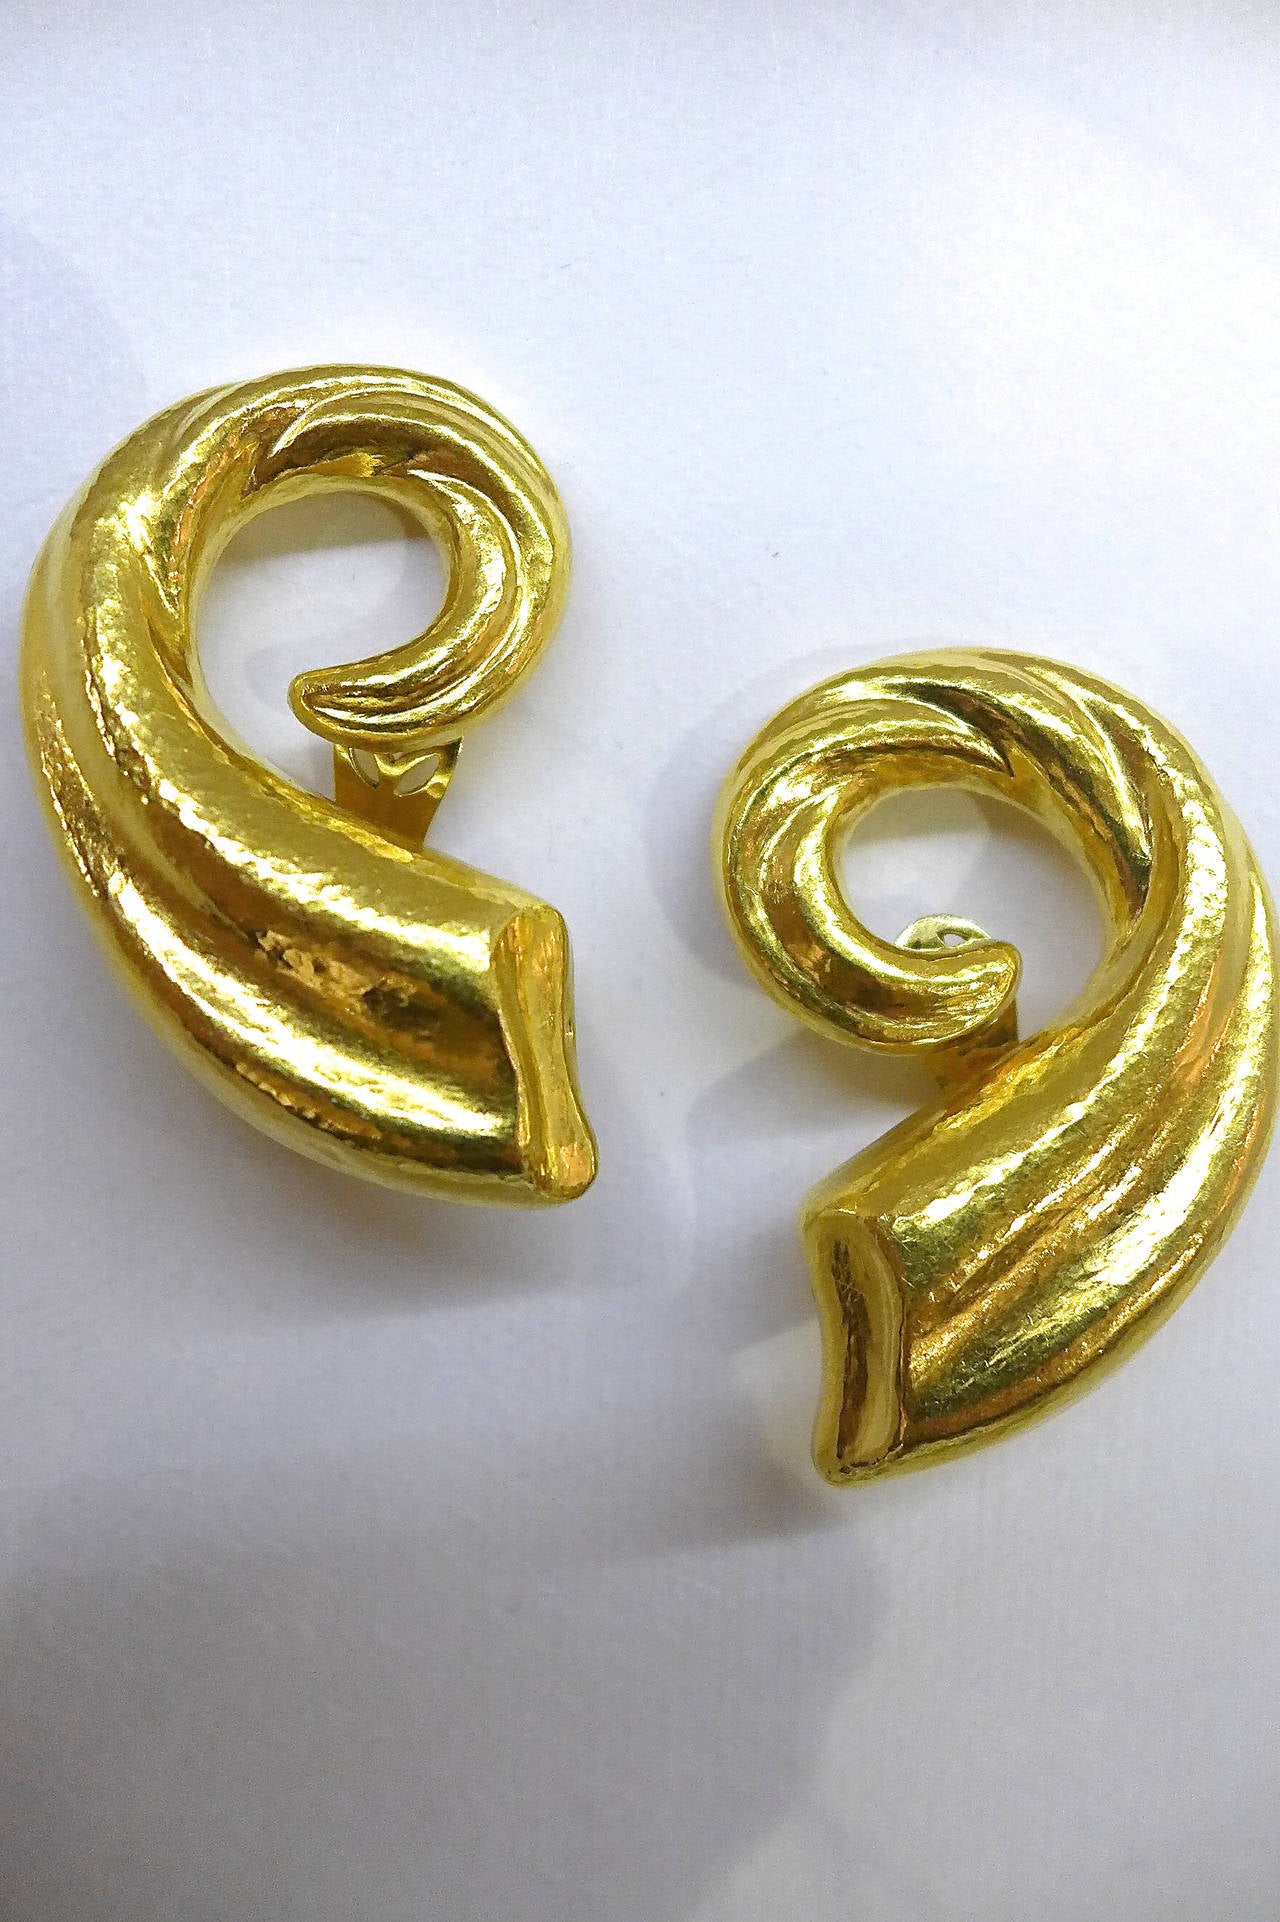 A spectacular pair of yellow hammered gold Lalaounis earrings representing horns of plenty. 
Height : 54 mm 
Width : 35 mm
Weight : 27.7 grams